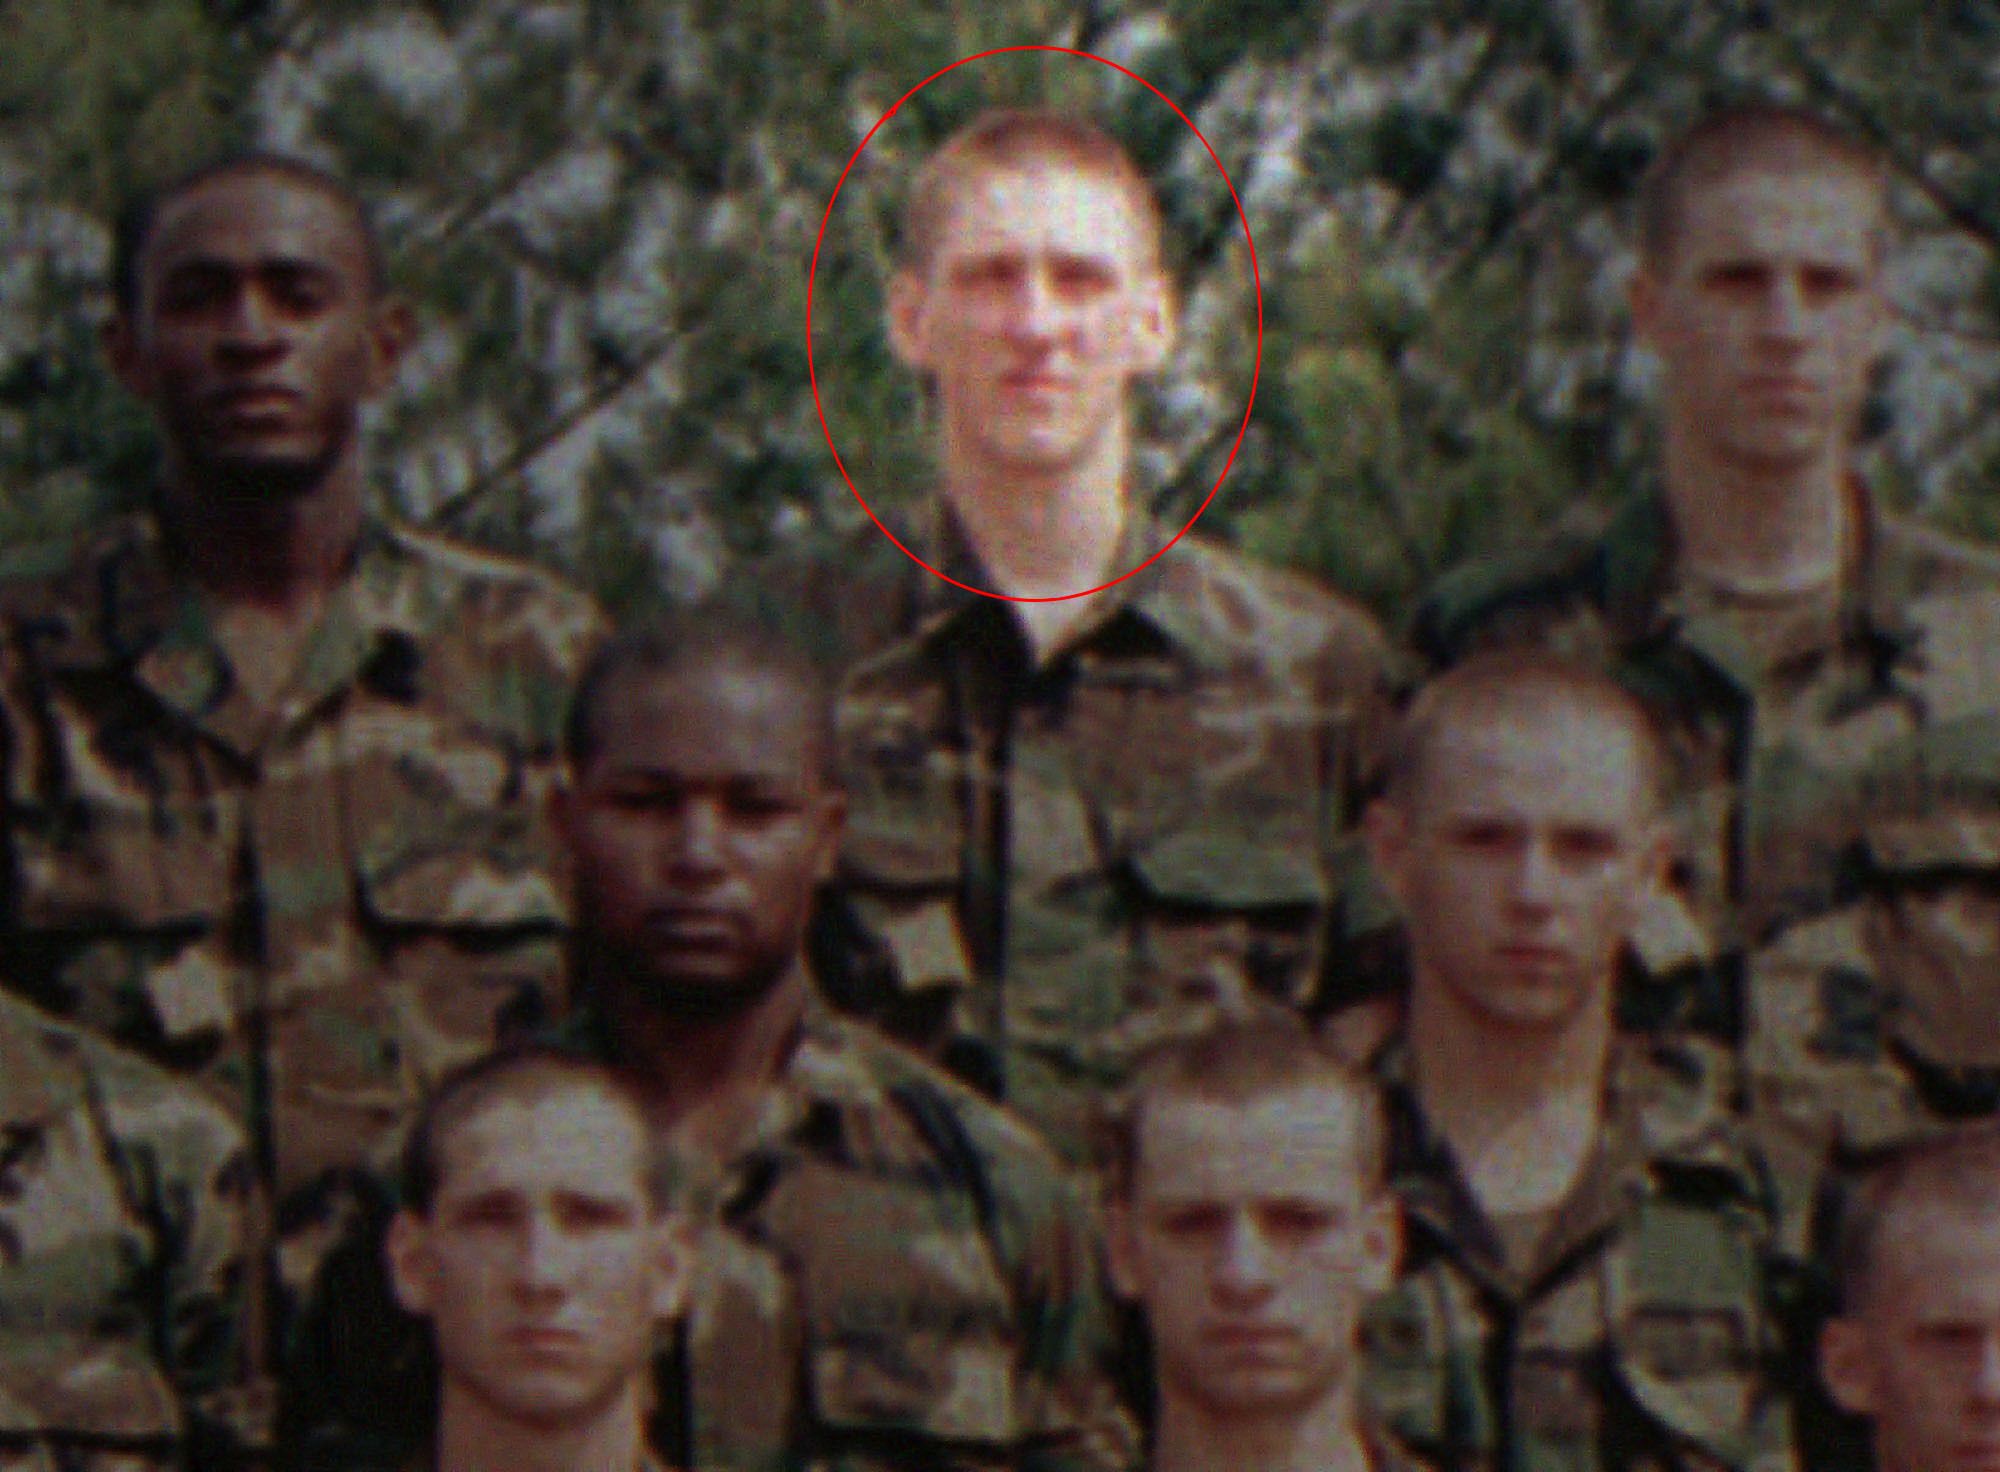 Timothy McVeigh, top center, poses with members of his platoon during a break in infantry training at Ft. Benning, Georgia, J